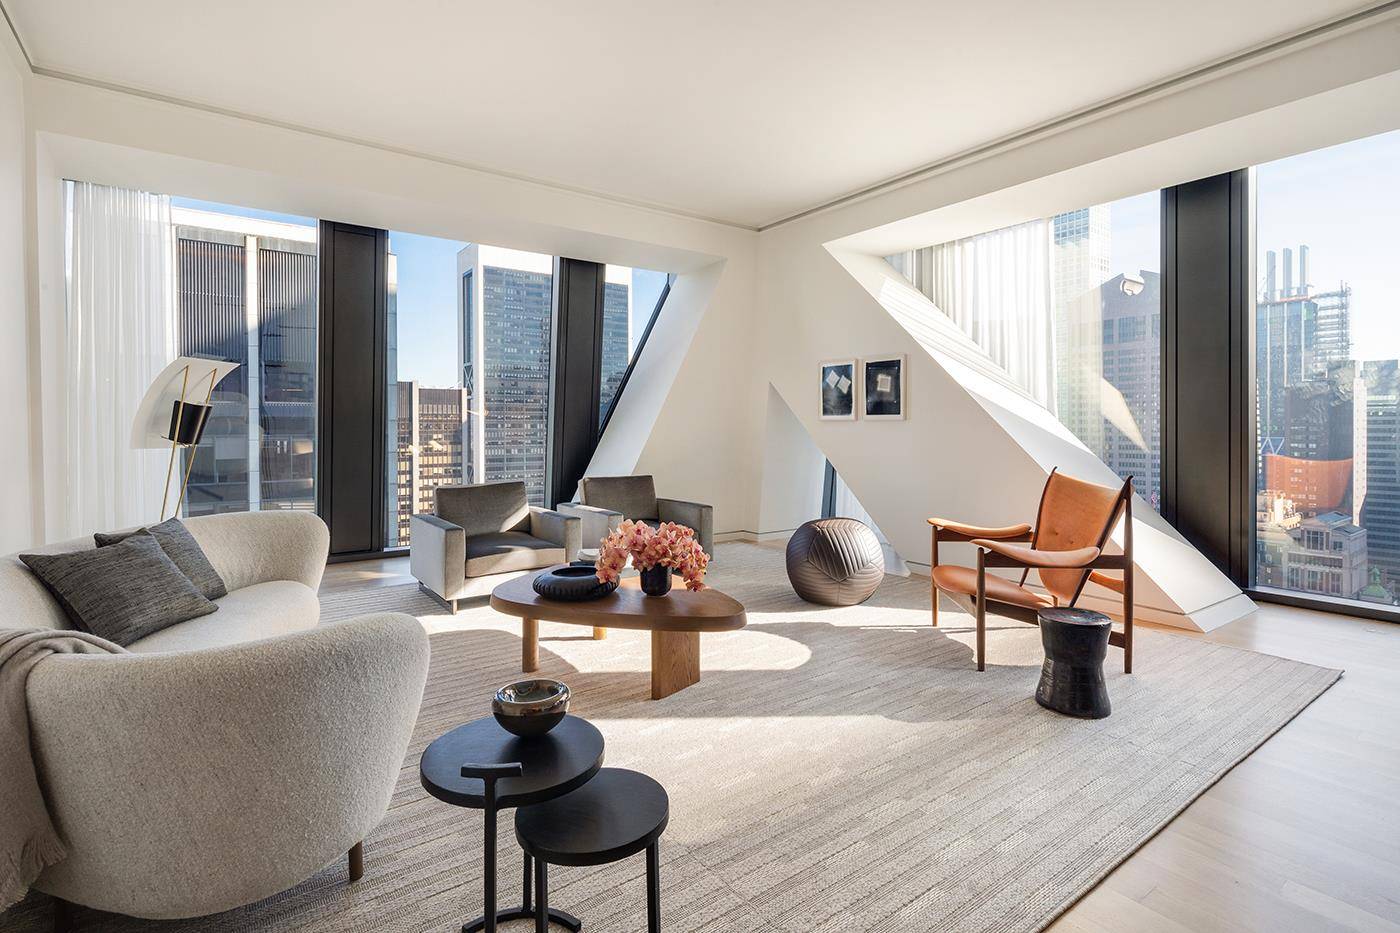 Balancing grand scale living with the intimate feeling of home, Residence 25A at 53 West 53 comprises 3, 110 square feet, offering two split bedrooms, two and a half bathrooms, ...